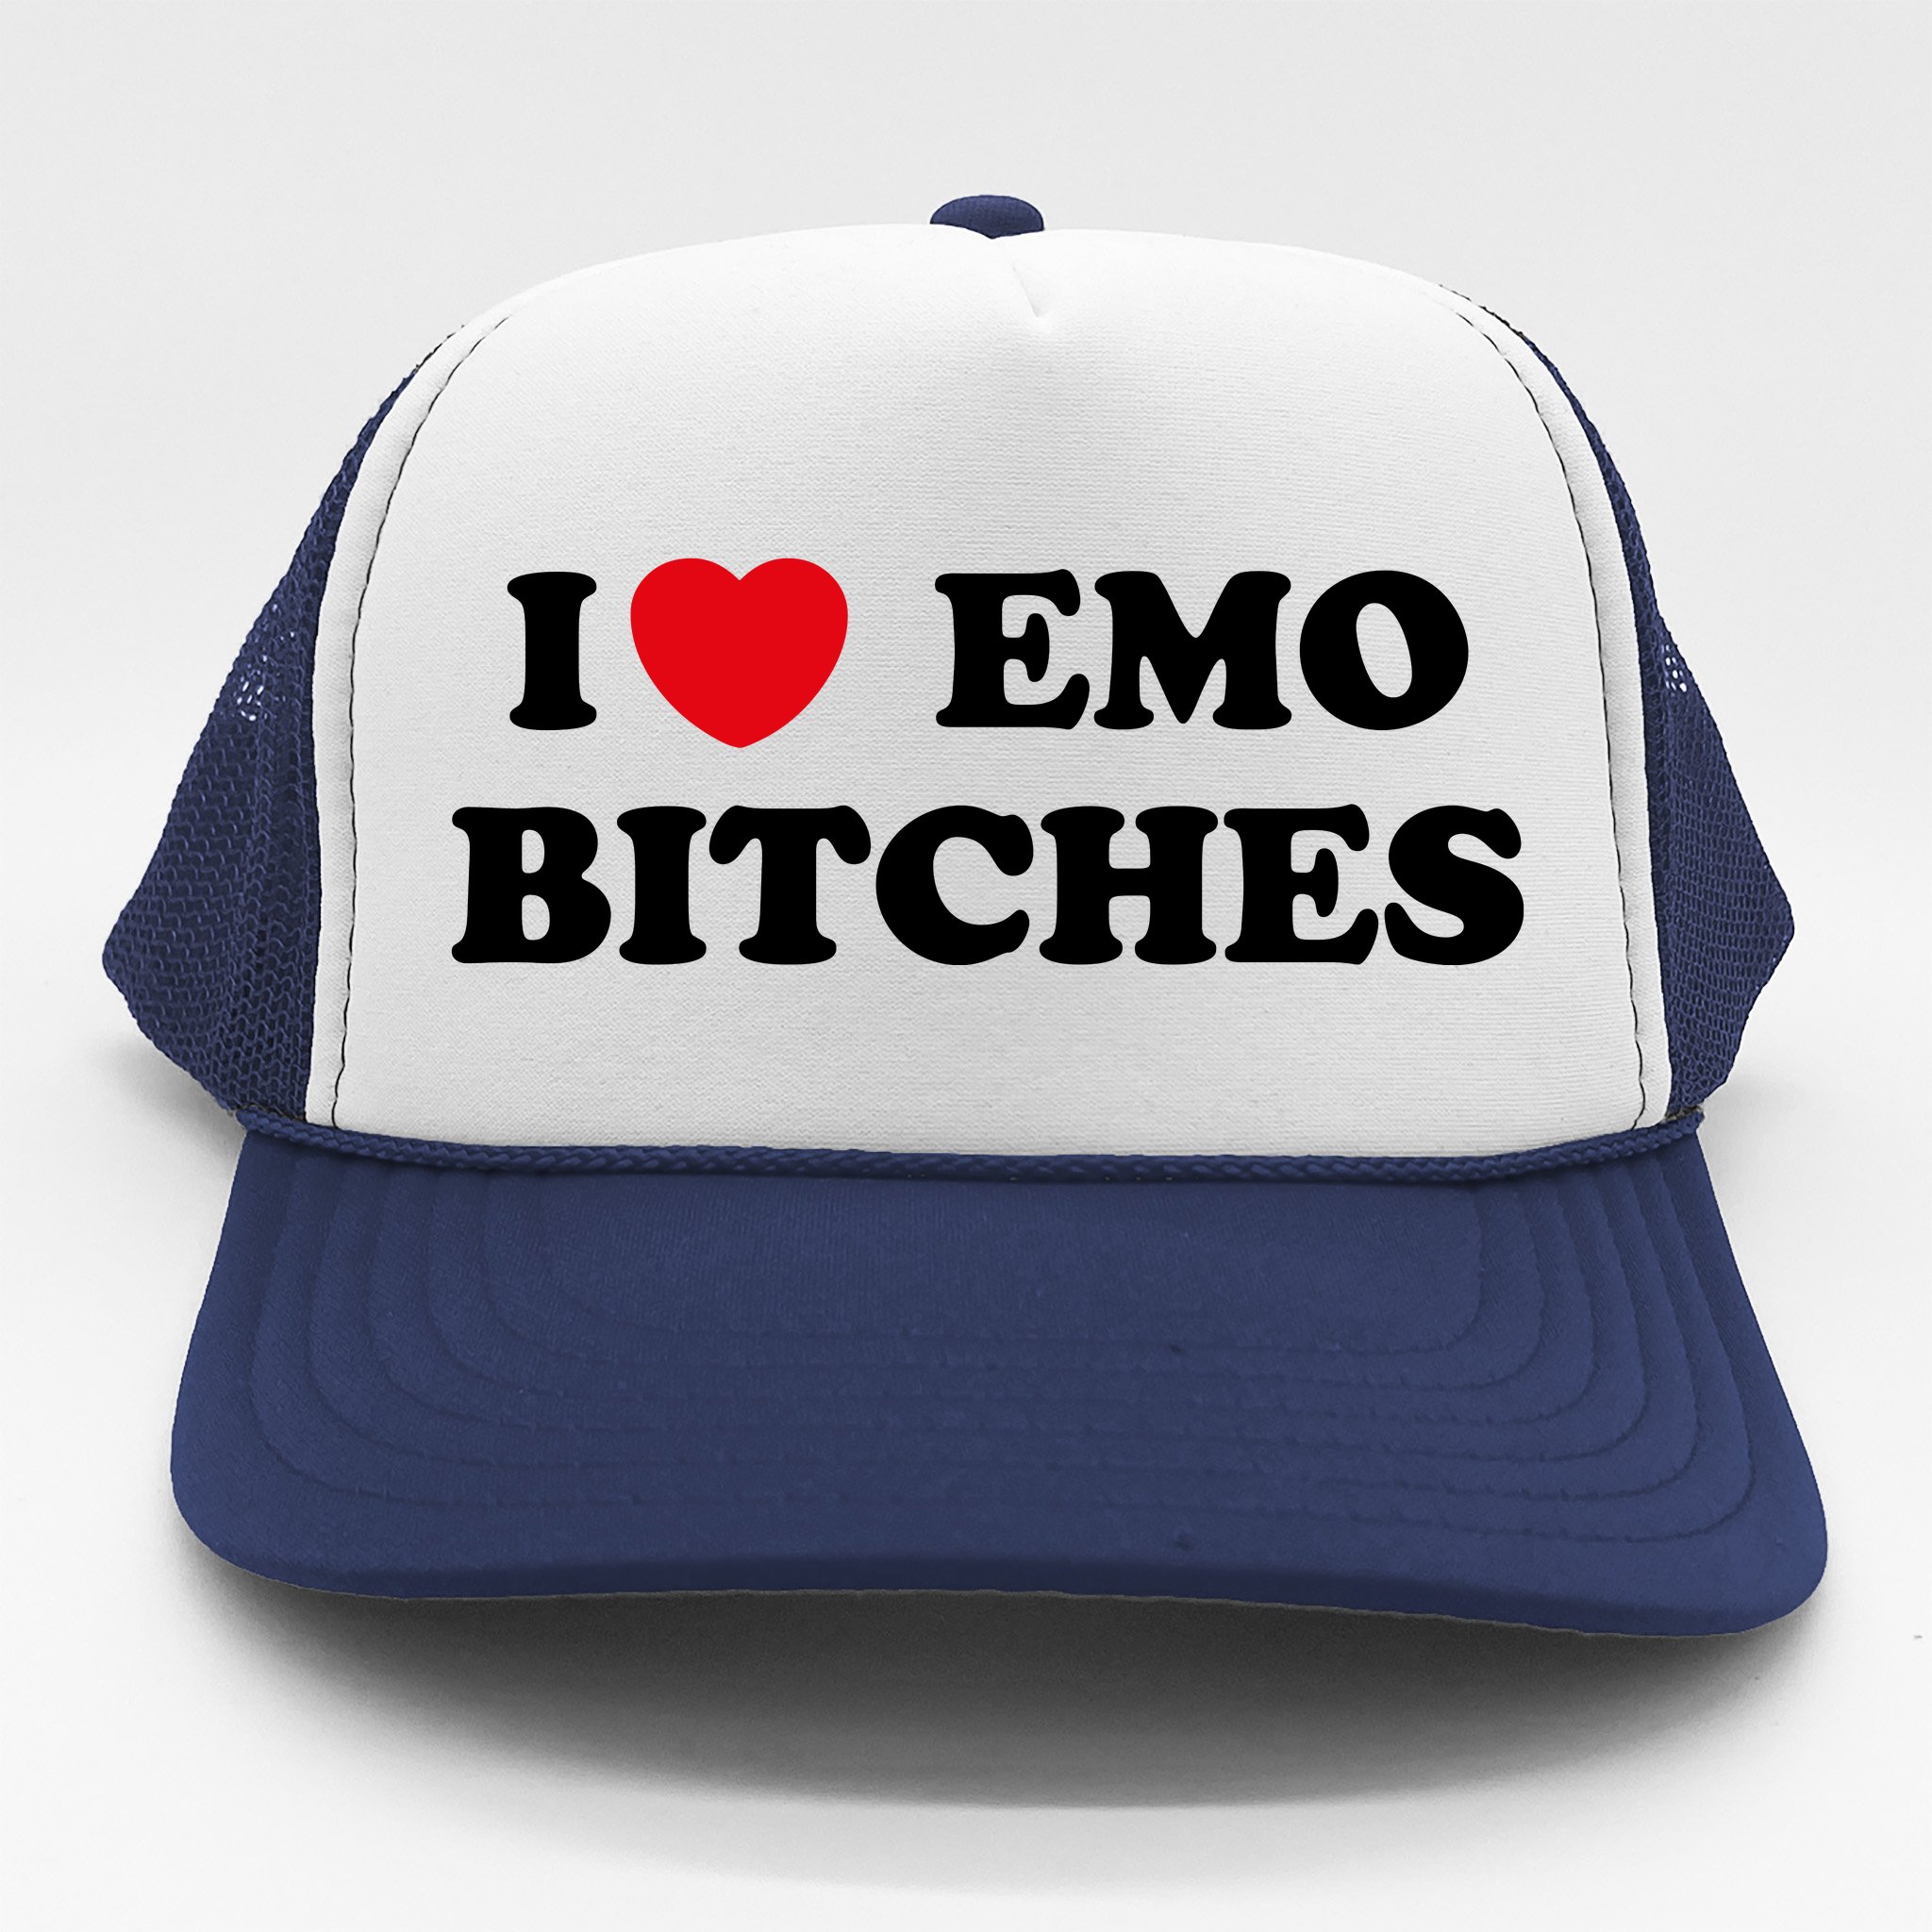  I Love Emo Girls T-Shirt : Clothing, Shoes & Jewelry